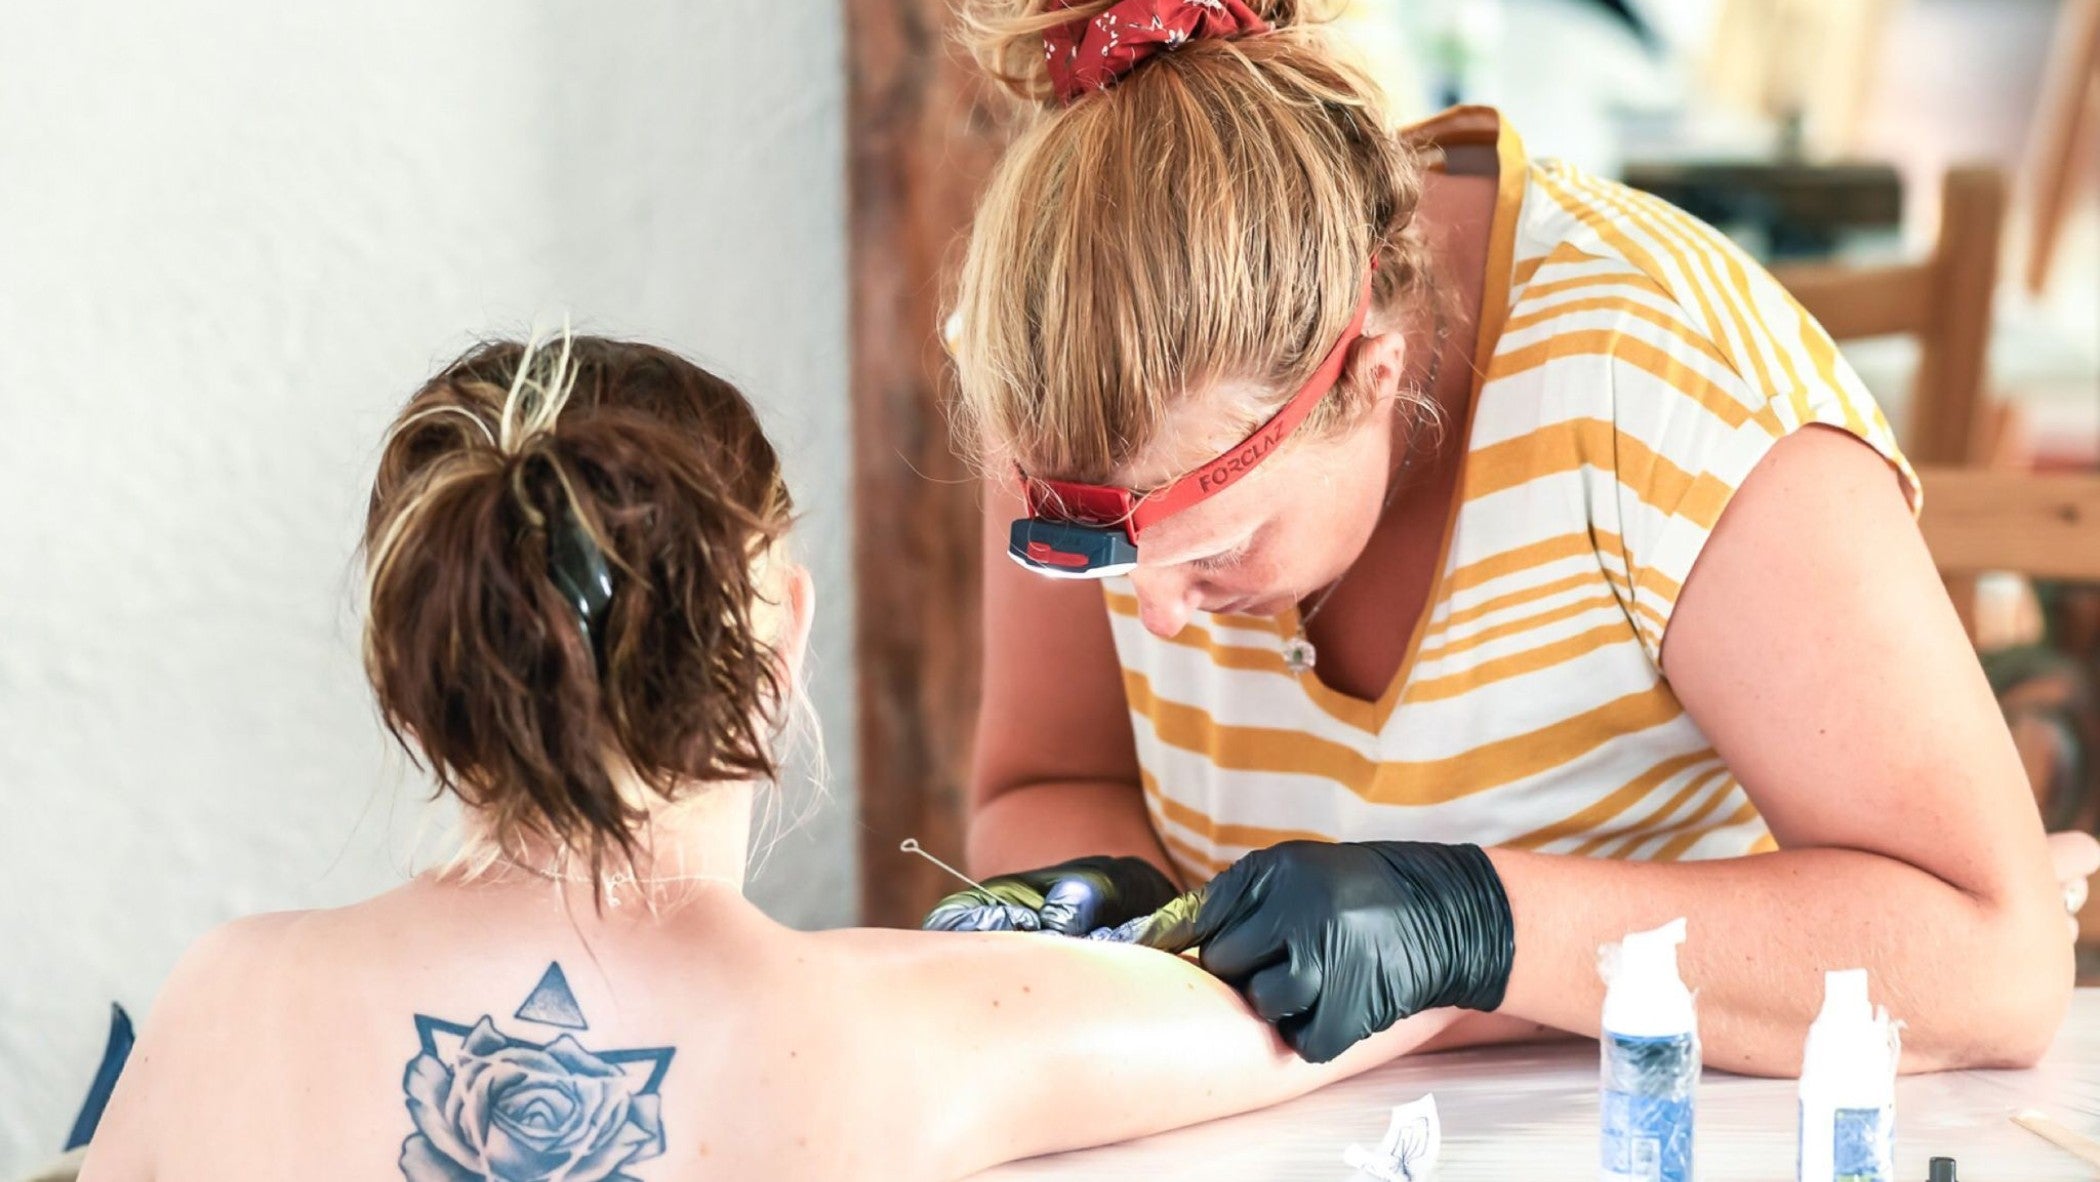 Awina in action with torch and gloves doing a handpoke tattoo on a girl's arm at a table PHOTO CREDIT: Createconnect@agency